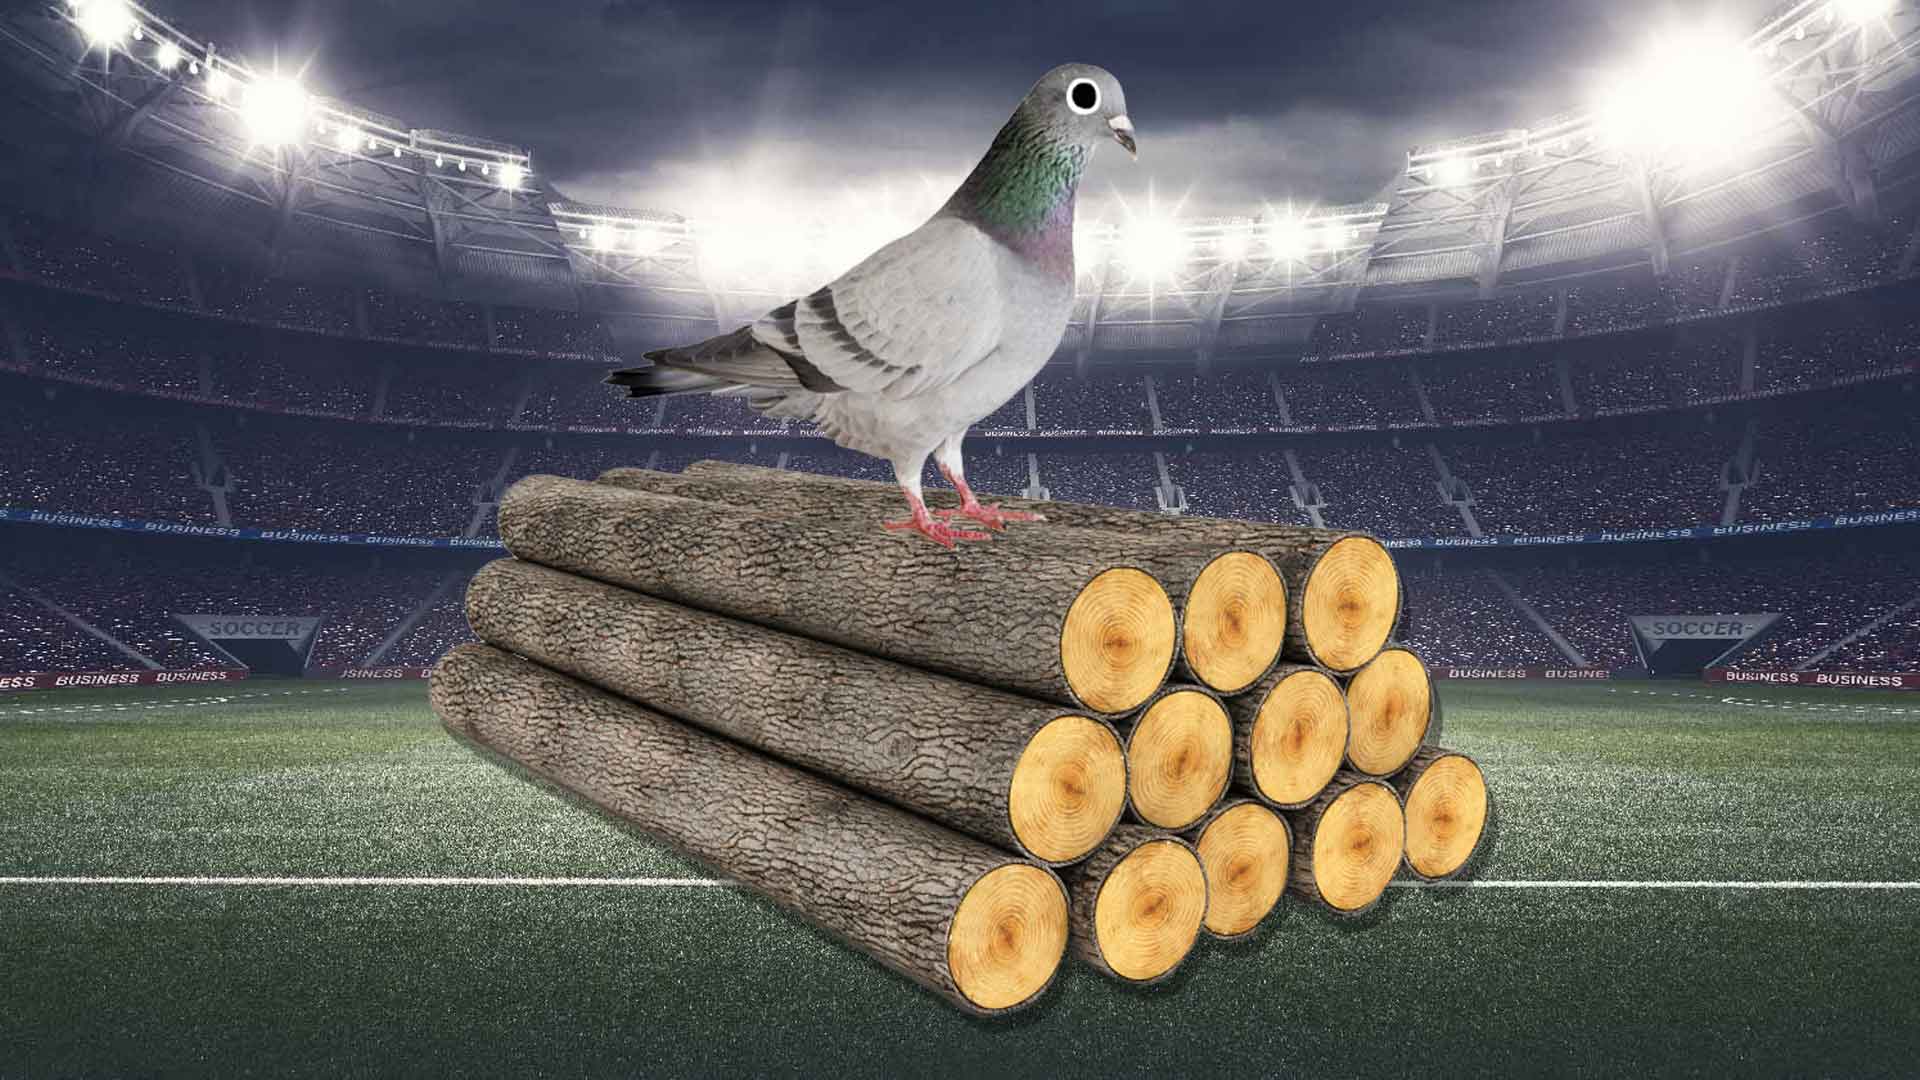 A pigeon sitting on a pile of logs